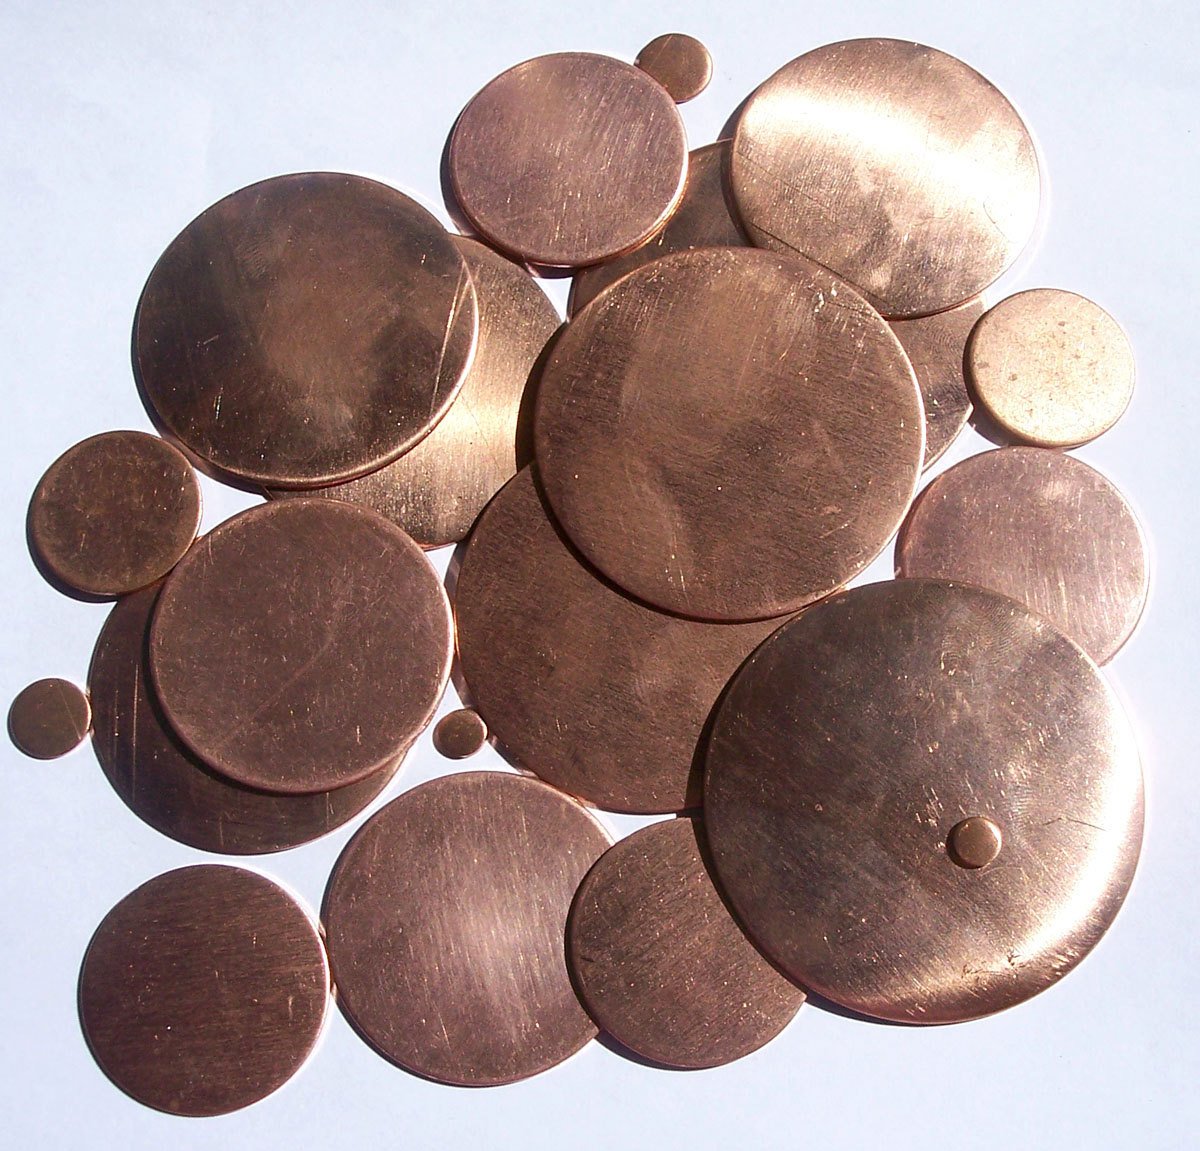 Copper Blank Shapes - 20 Gauge - 44mm Disc Cutout for Enameling Stamping Texturing- 1 3/4 inch Blanks